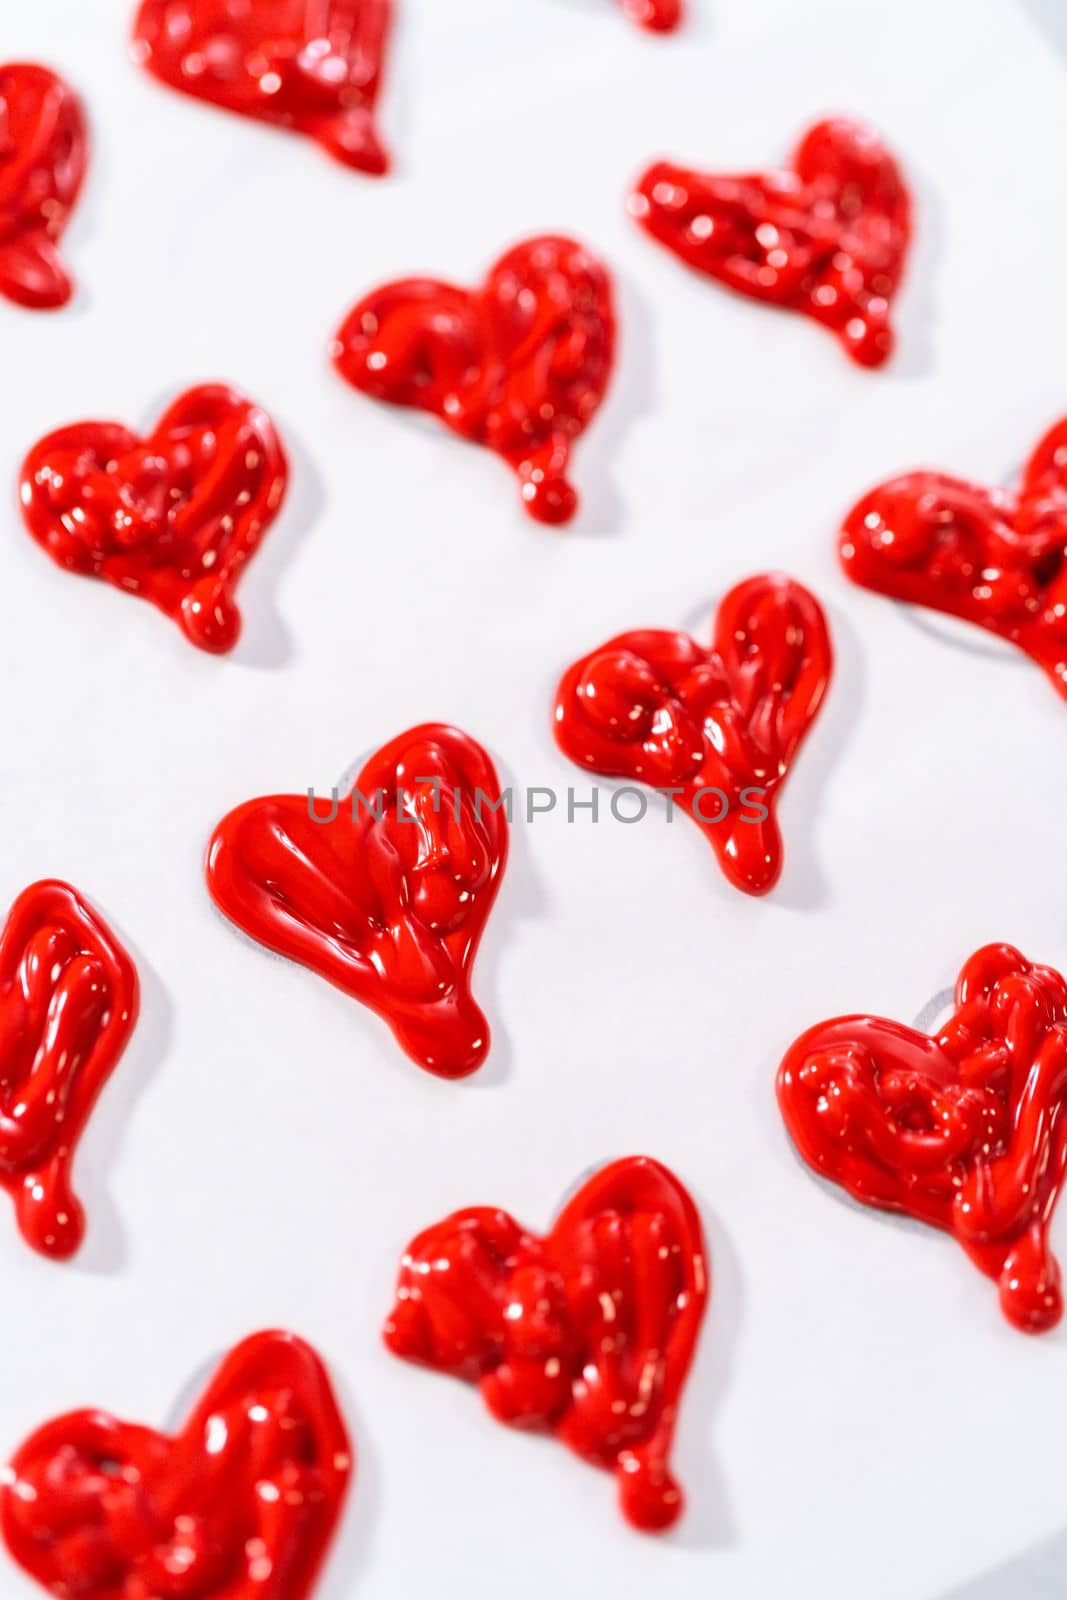 Piping melted chocolate from piping back over the parchment paper to make a chocolate heart.